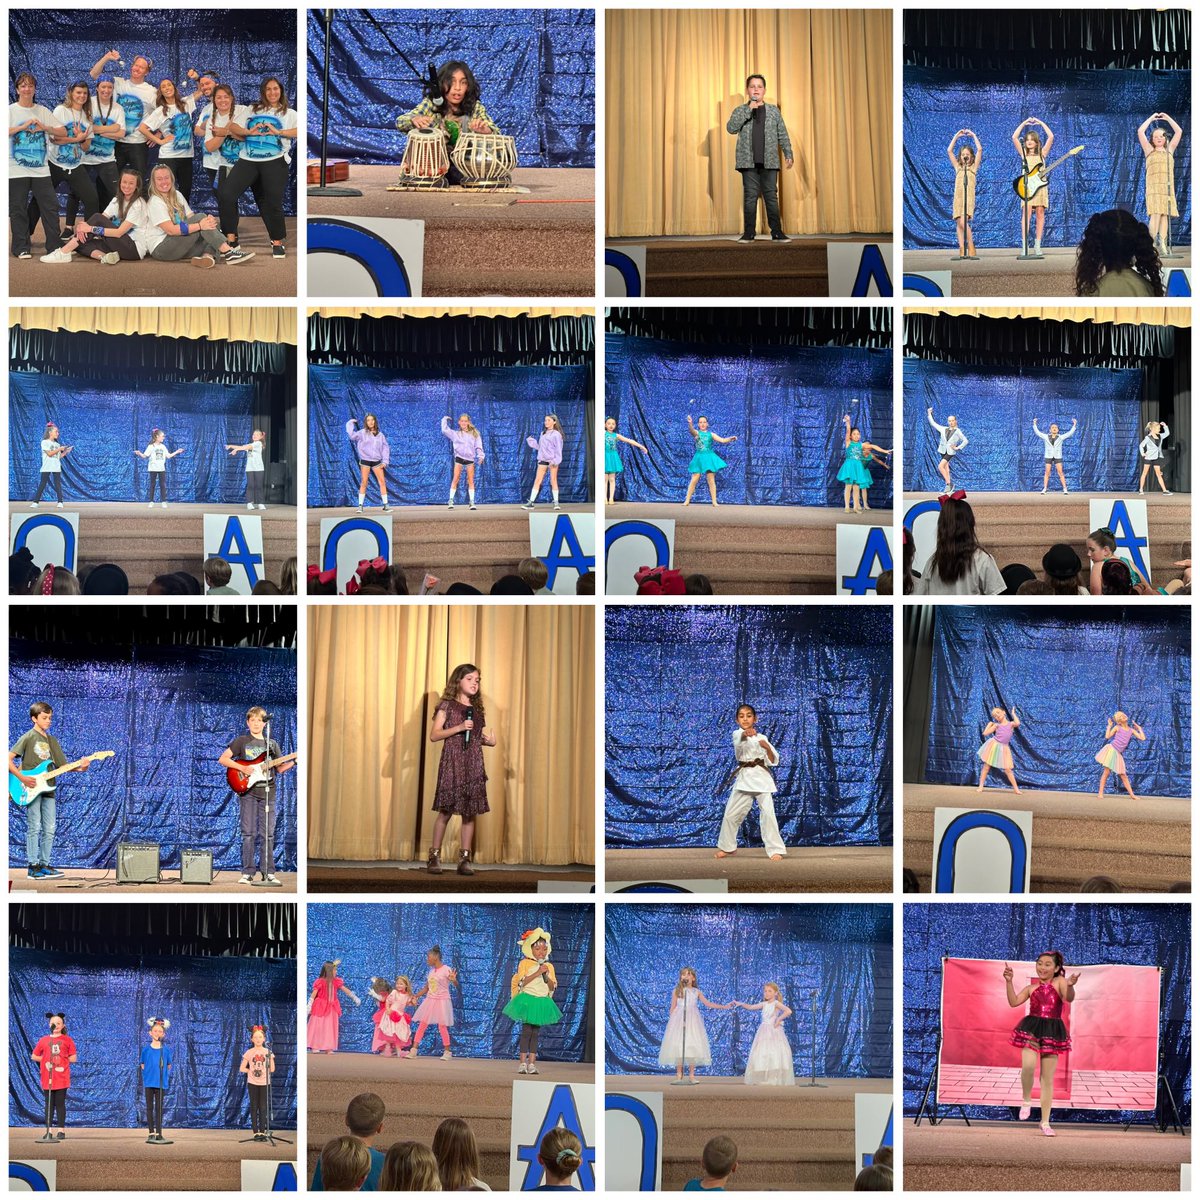 Wow do our Seagulls have Talent! Dancing, singing, ribbon twirling, baton, guitar, piano, violin, comedy… is there anything they can’t do!? We are so proud of all our performers for sharing their talents! #SeagullsGotTalent #SeagullsSoarTogether 💙 @SunsetHillsES